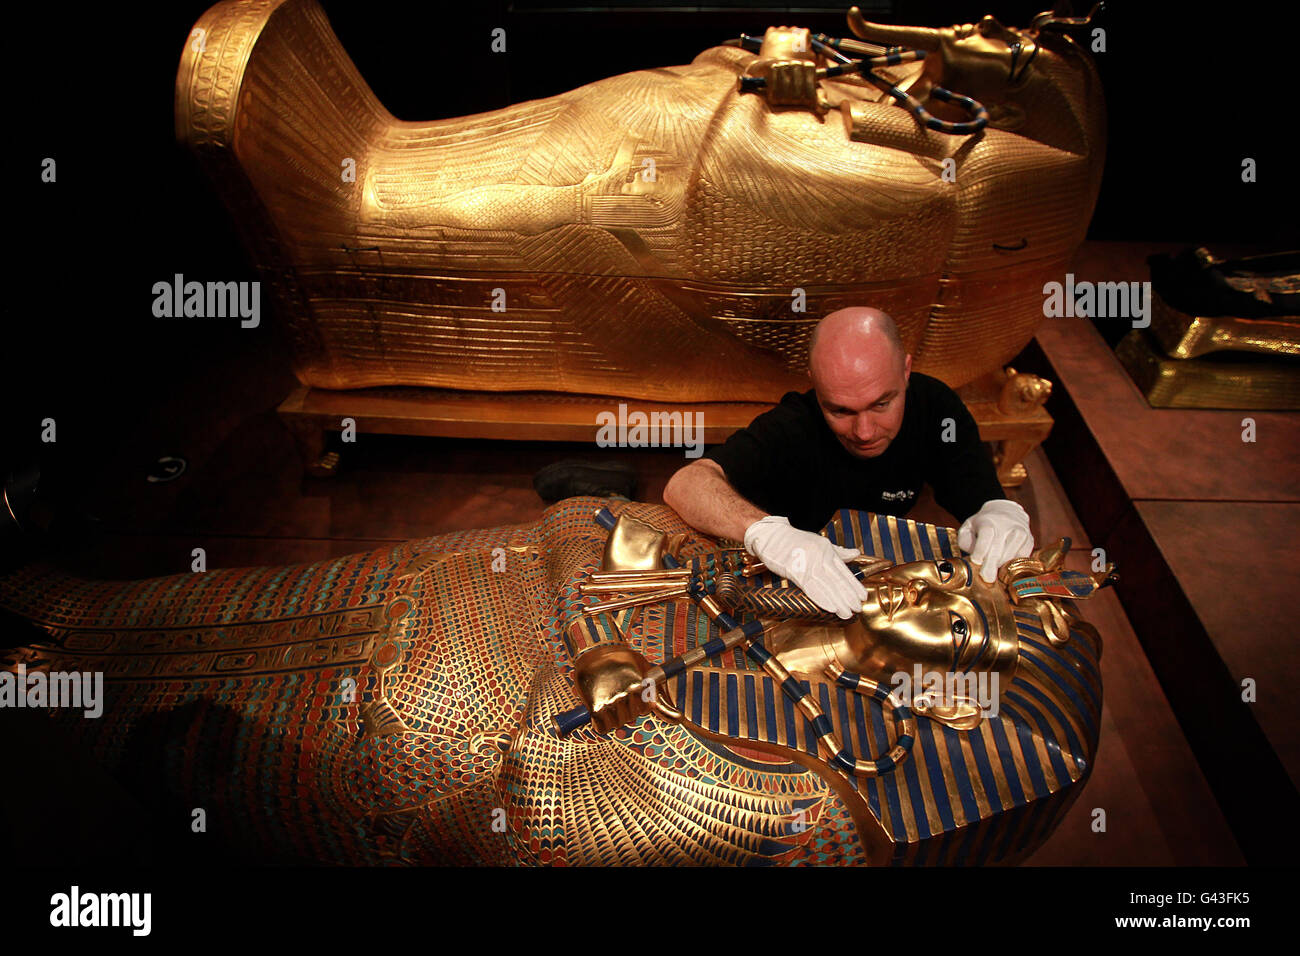 A curator examines one of the replica sarcophagus at the Tutankhamun: His Tomb and Treasures show at the Royal Dublin Society. The show recreates three burial chambers and opens on the 17th February. Stock Photo